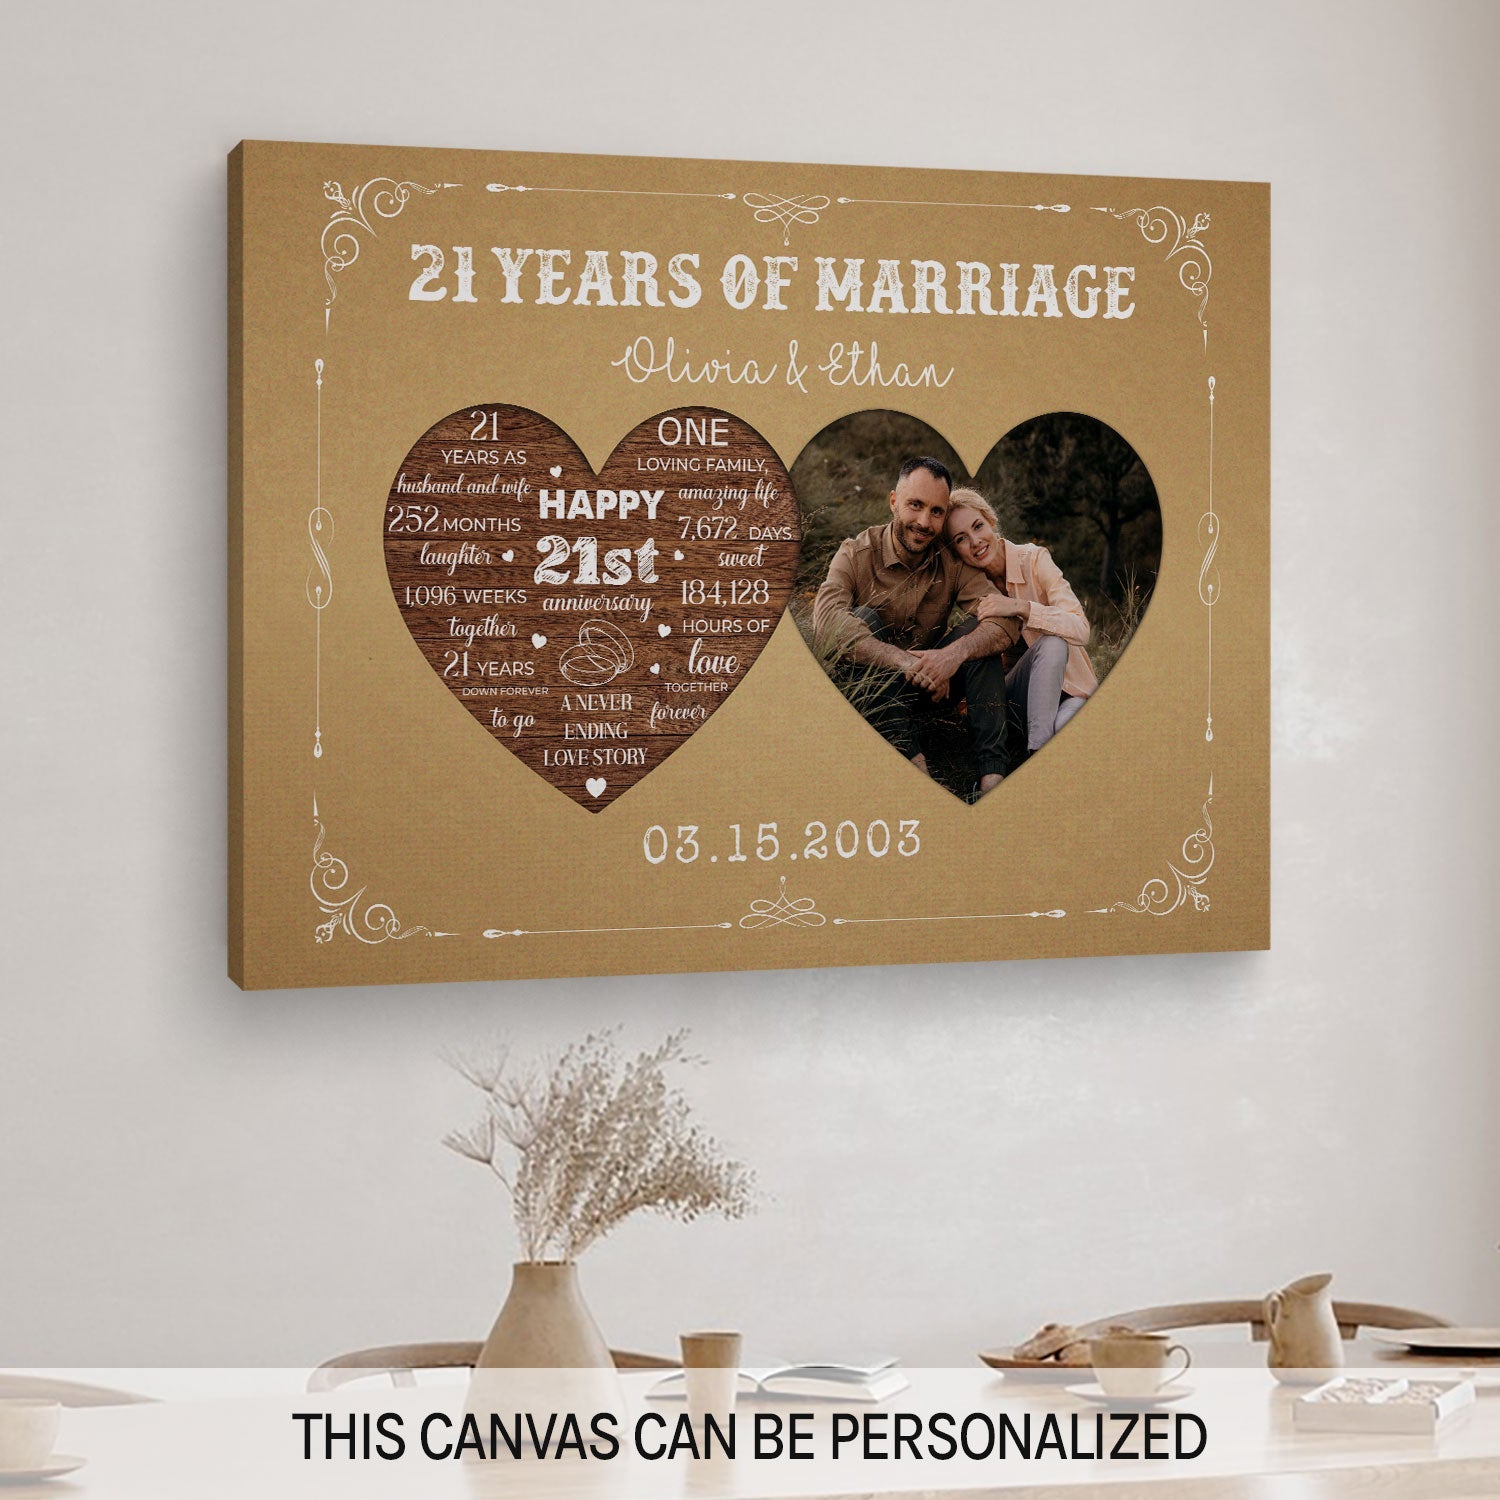 21 Years Of Marriage - Personalized 21 Year Anniversary gift For Parents, Husband or Wife - Custom Canvas Print - MyMindfulGifts